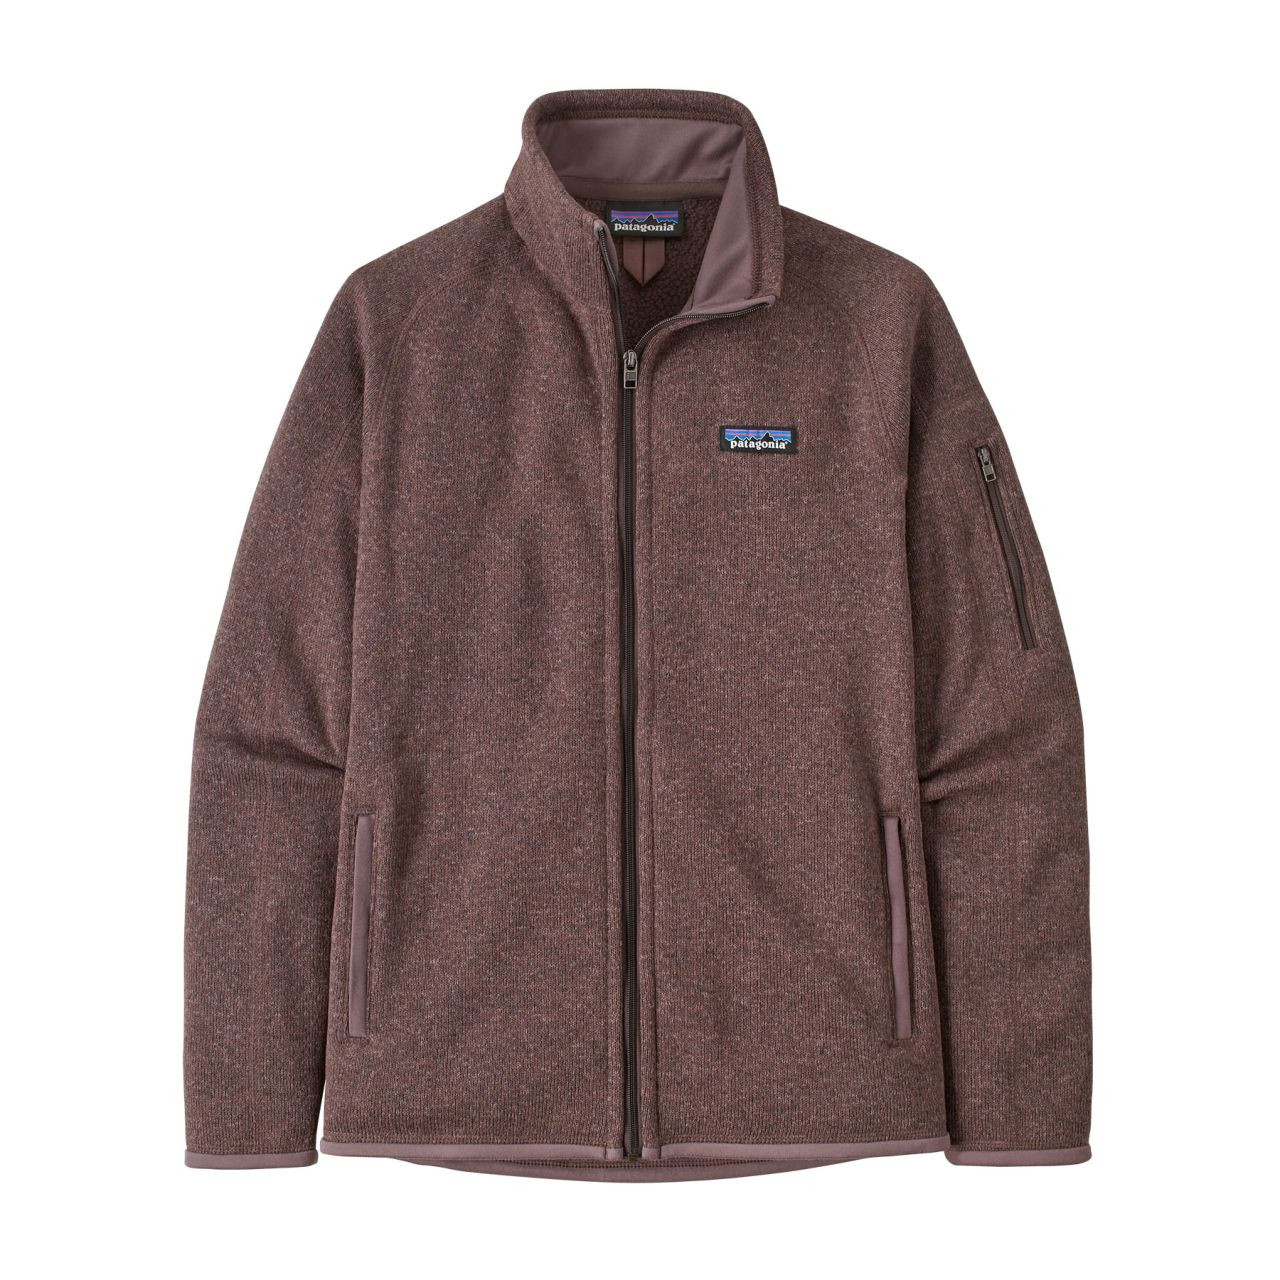 Patagonia Better Sweater Jacket - Women's (Fall 2022) - Dusky Brown